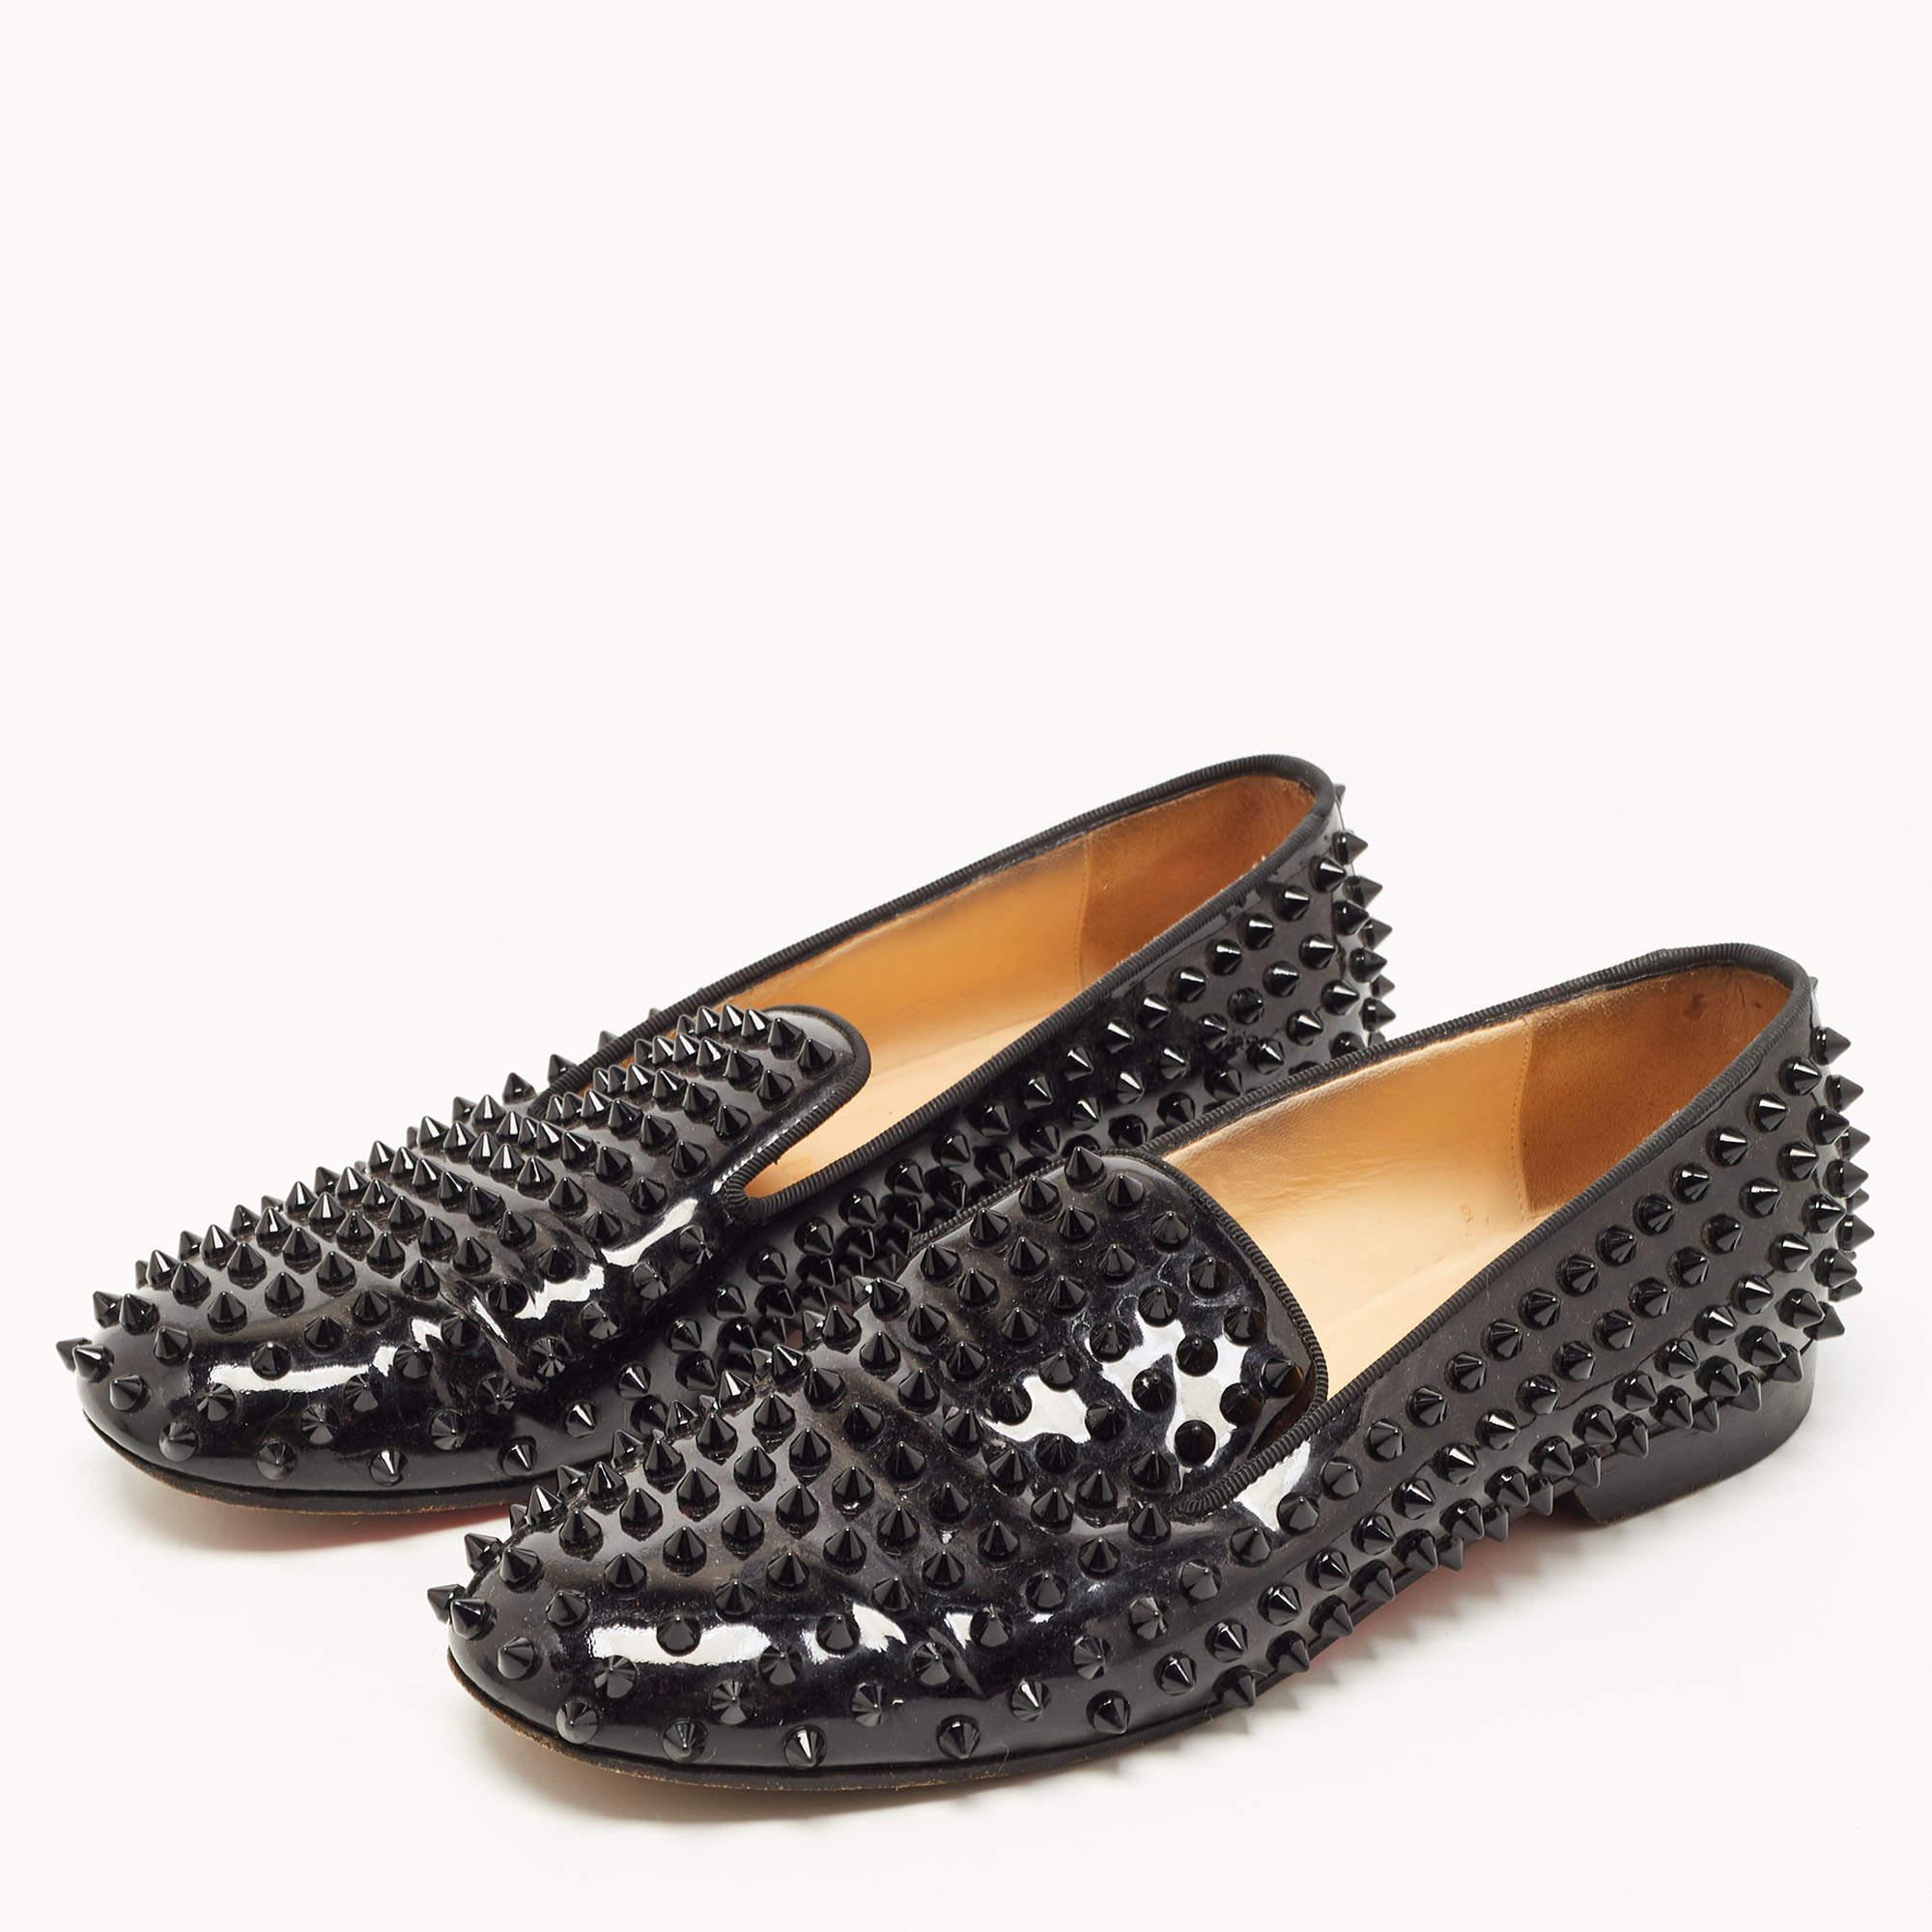 Christian Louboutin Black Dandelion Spikes Smoking Slippers Size 38 For Sale 2